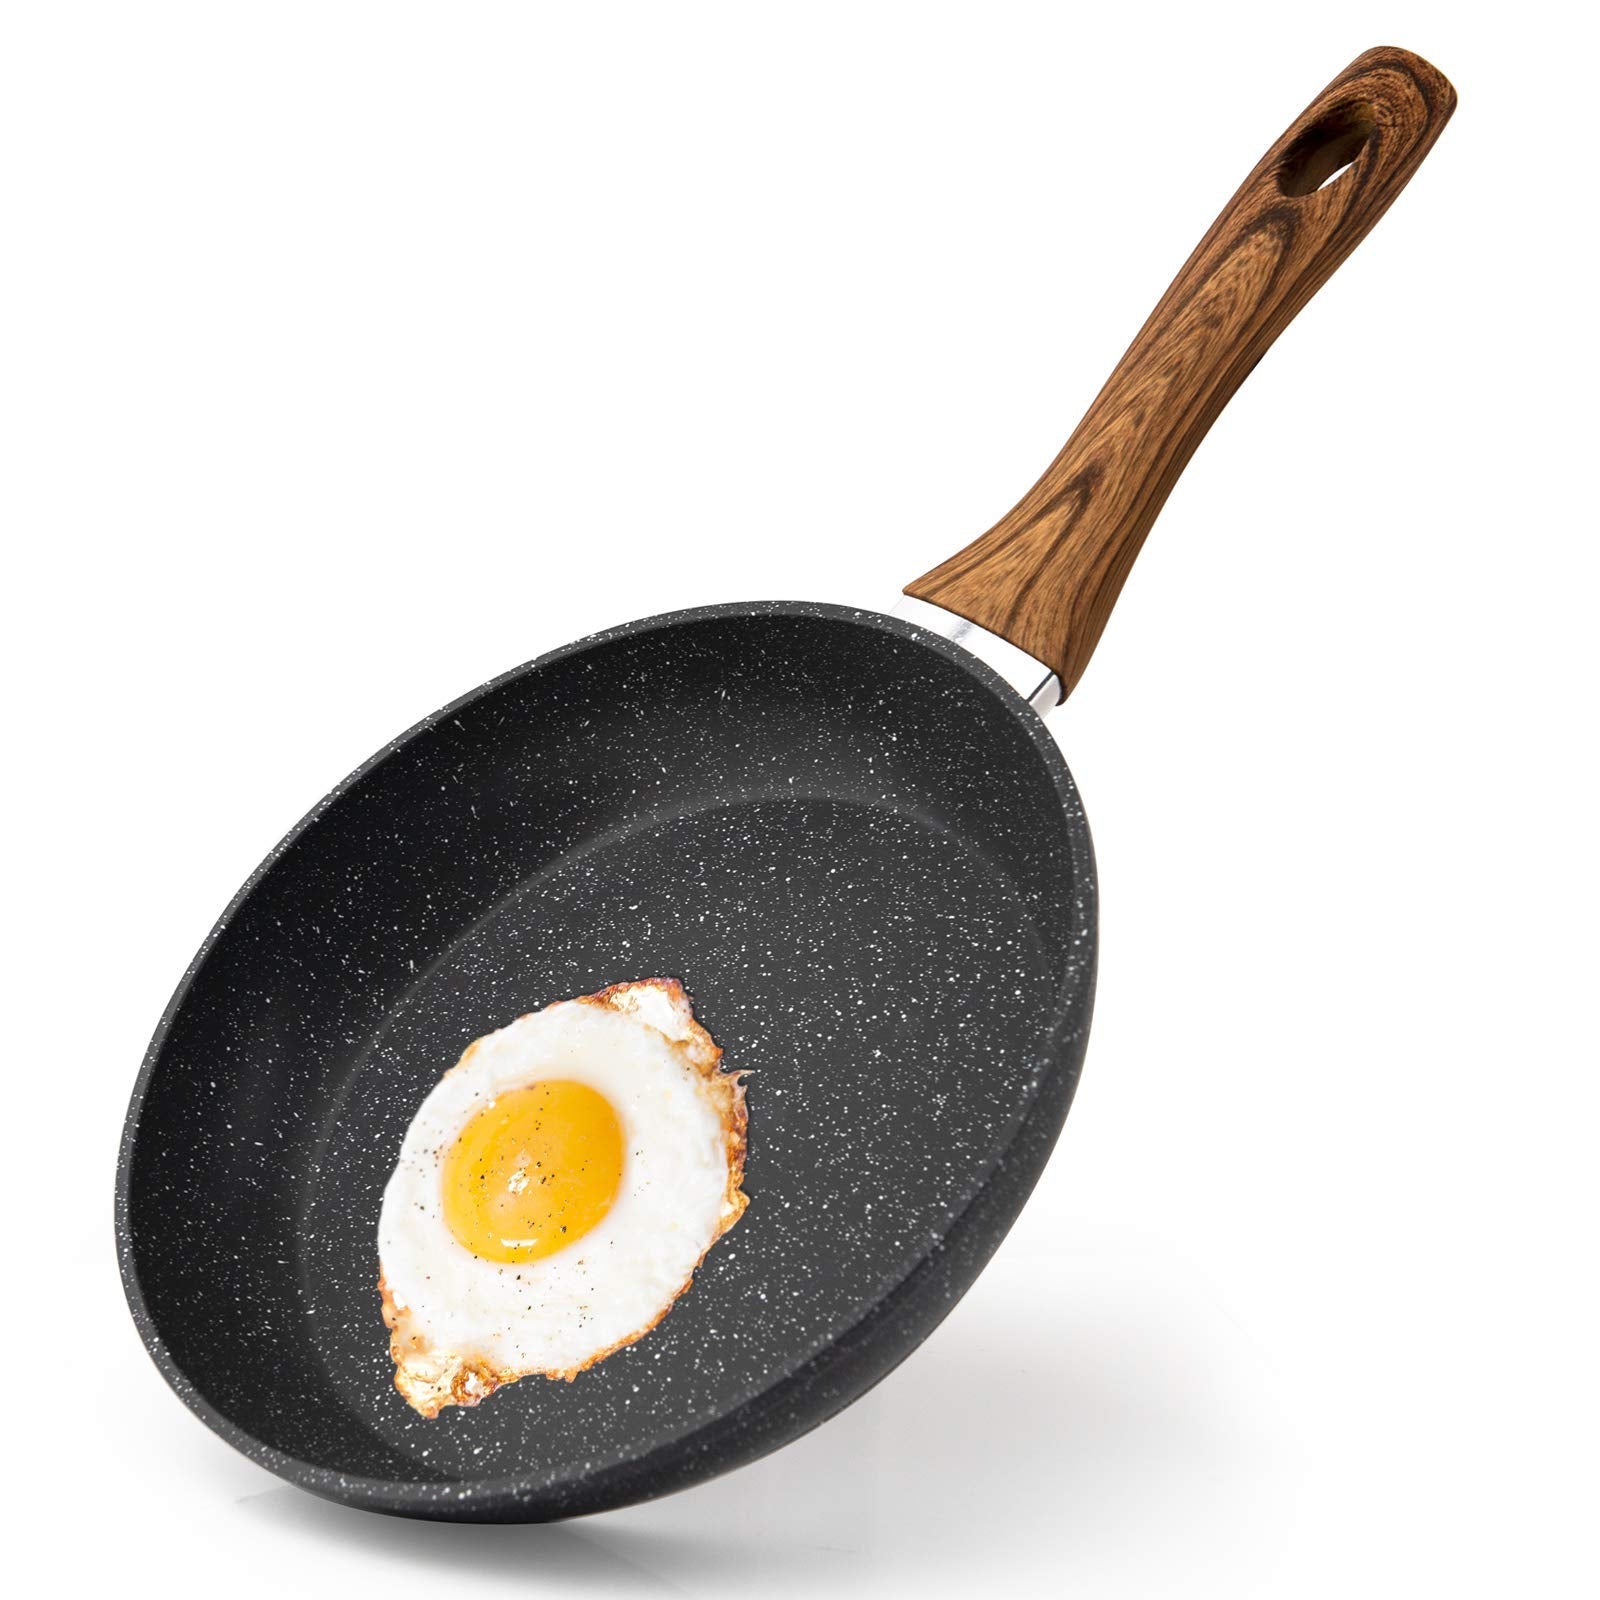 Make perfect eggs every time with our Nonstick Egg Frying Pan.